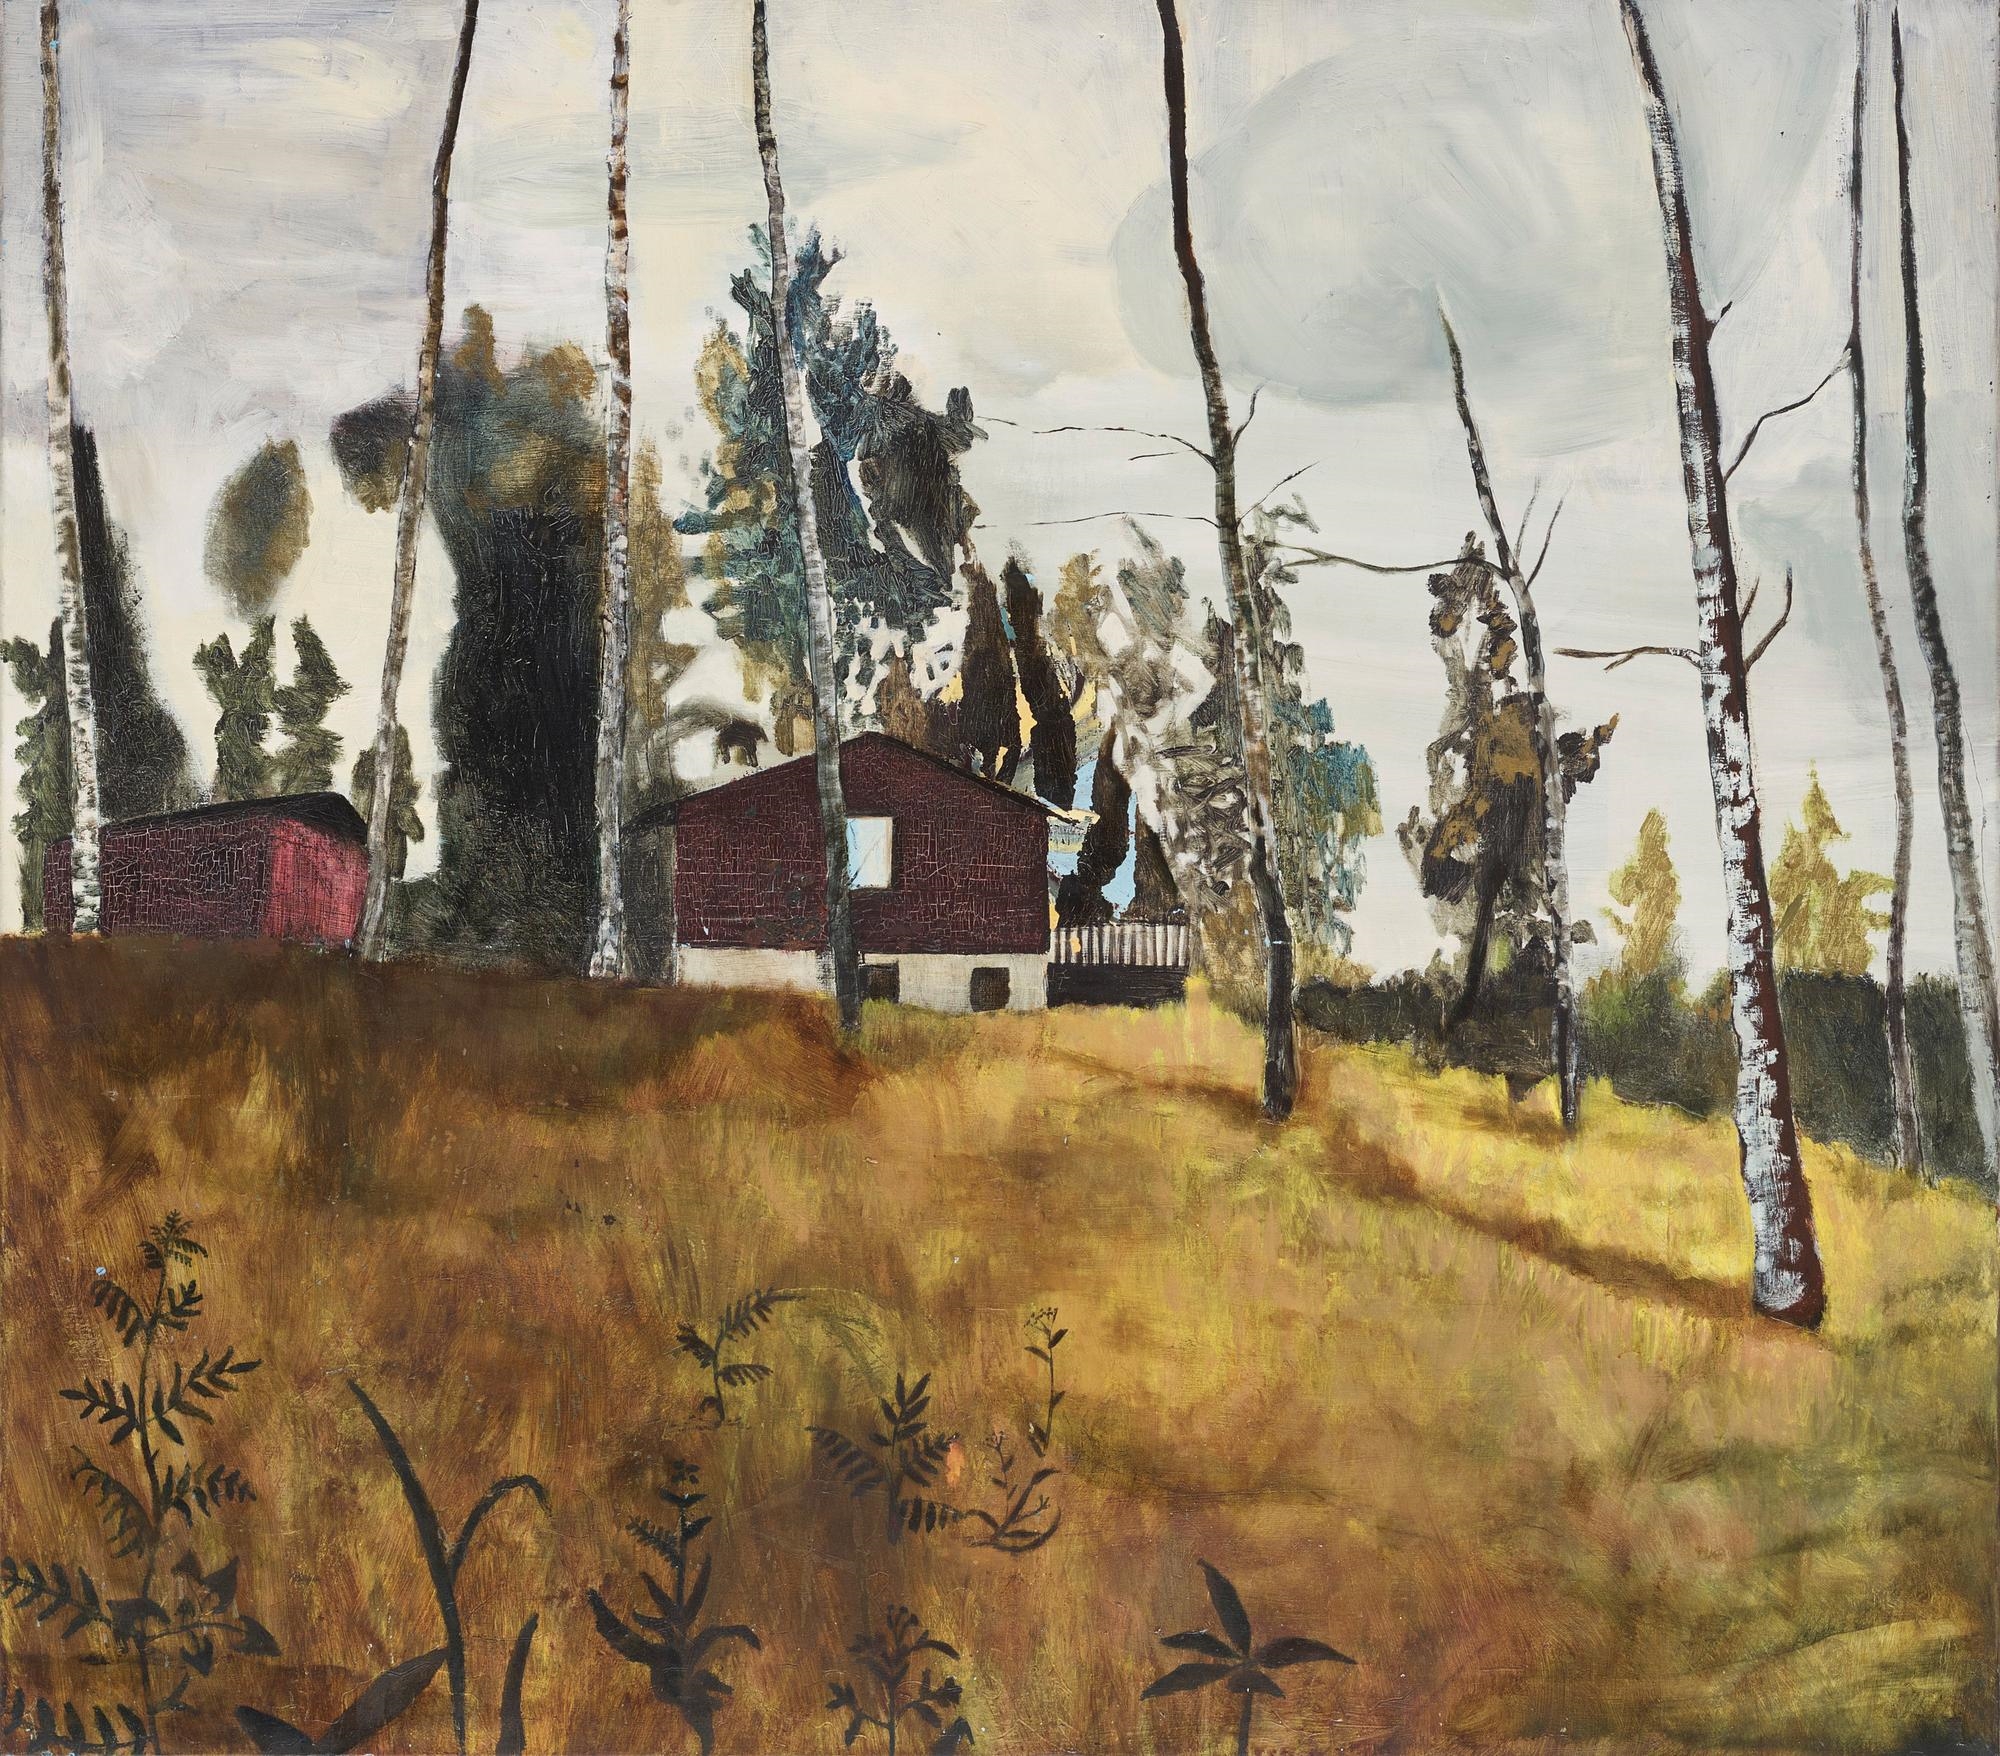 'Sportstugan' by Karin Mamma Andersson, dated 1990